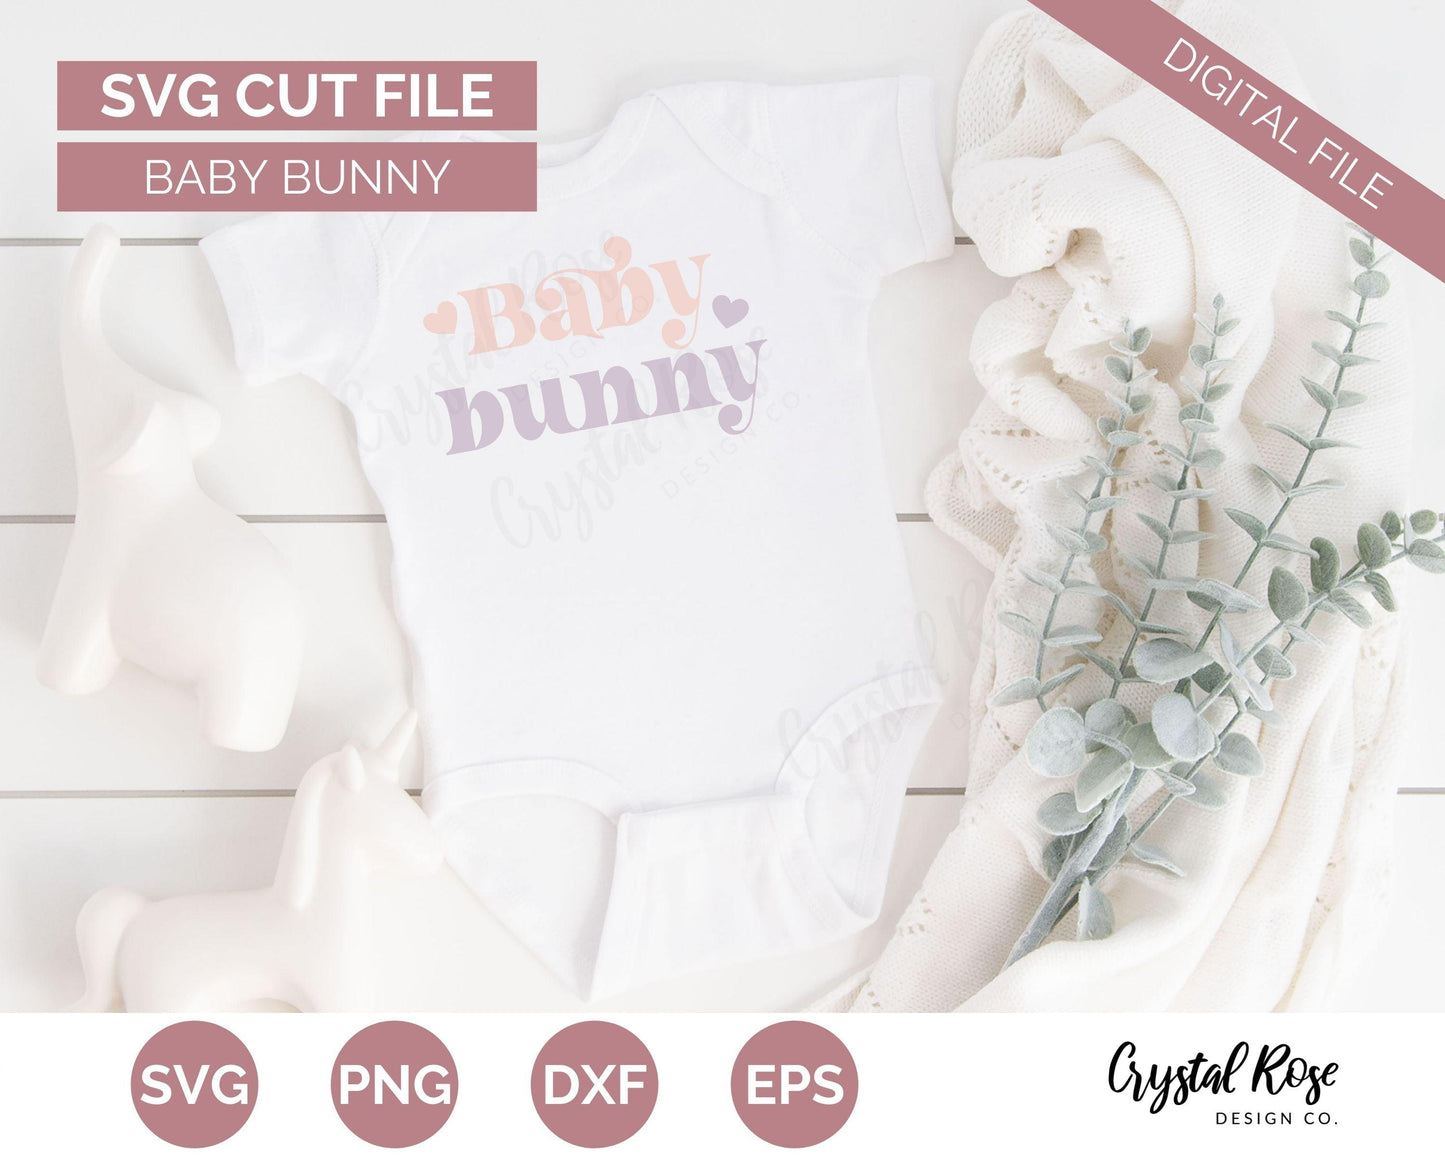 Baby Bunny SVG, Easter SVG, Digital Download, Cricut, Silhouette, Glowforge (includes svg/png/dxf/eps)